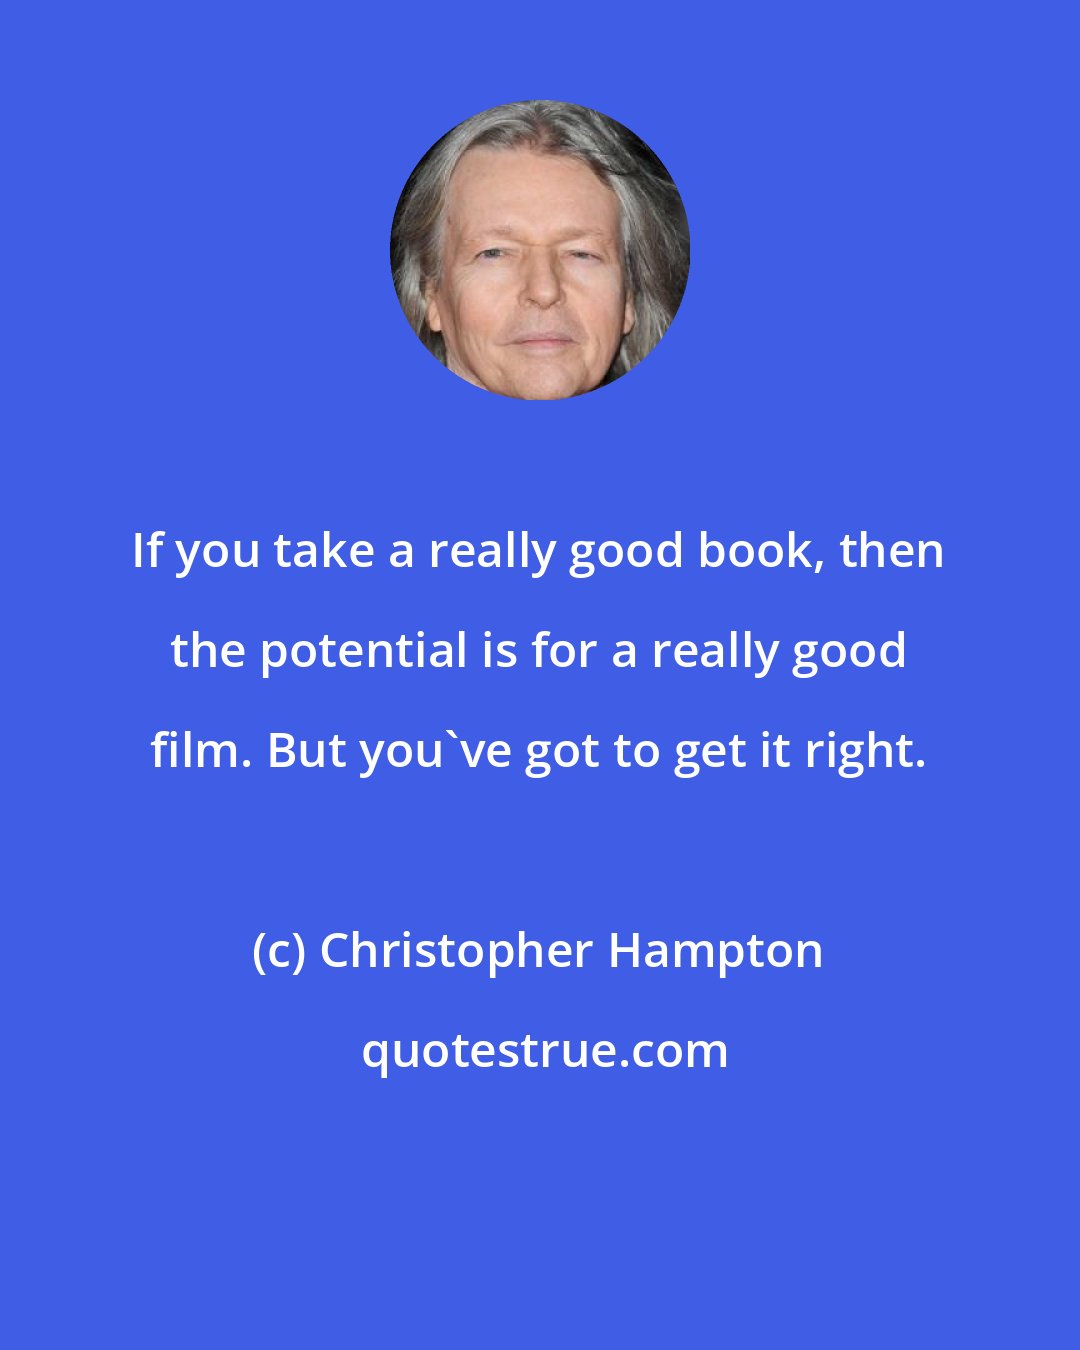 Christopher Hampton: If you take a really good book, then the potential is for a really good film. But you've got to get it right.